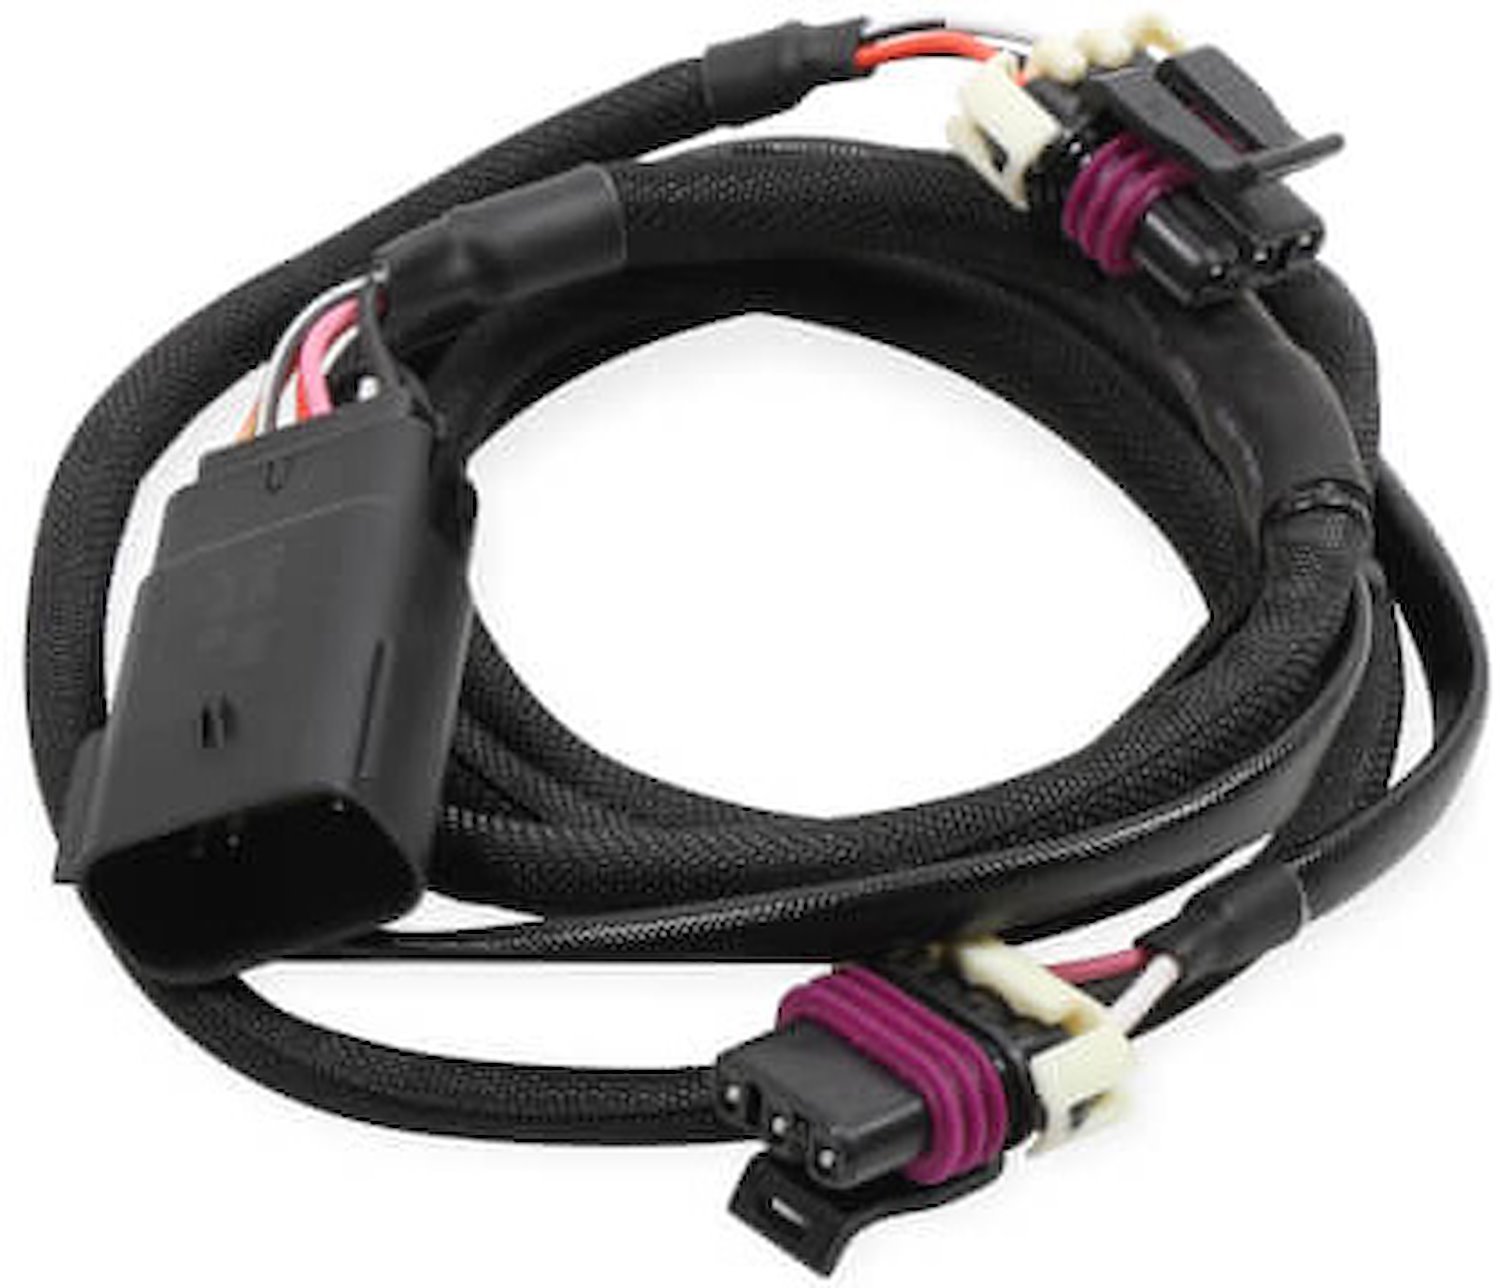 6LS Ignition Adapter Harness 24x/1x Front Cam Sensor